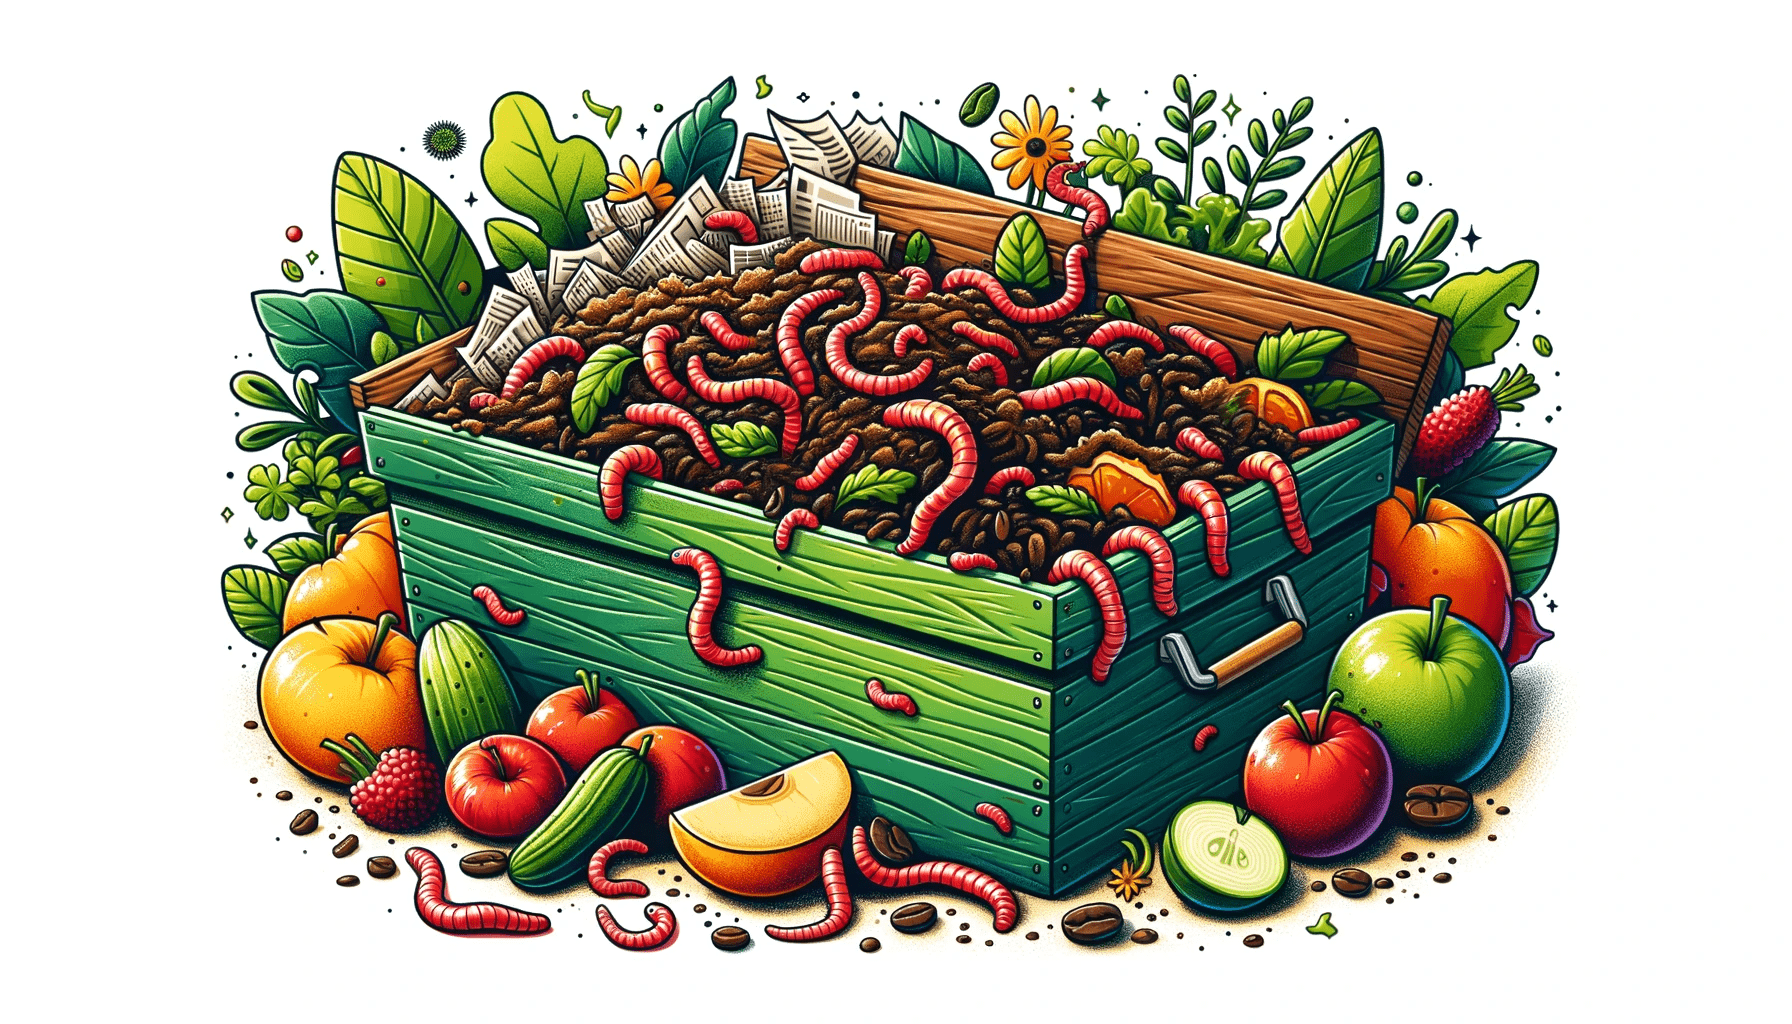 Compost Worms